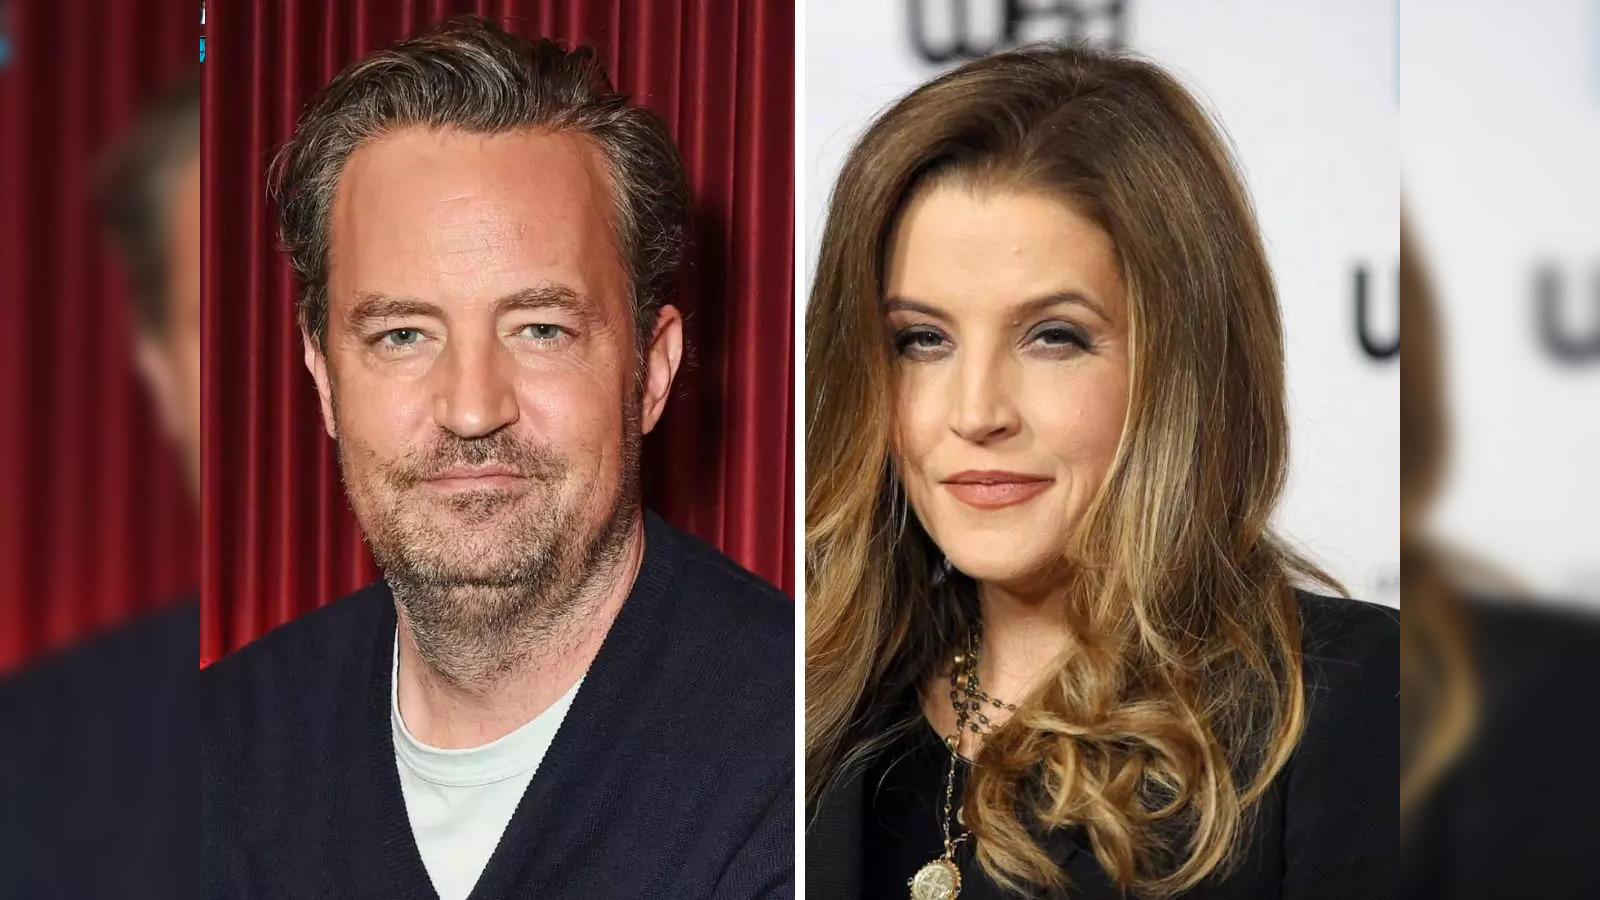 Curtain call: From 'Friends' star Matthew Perry to Lisa Marie